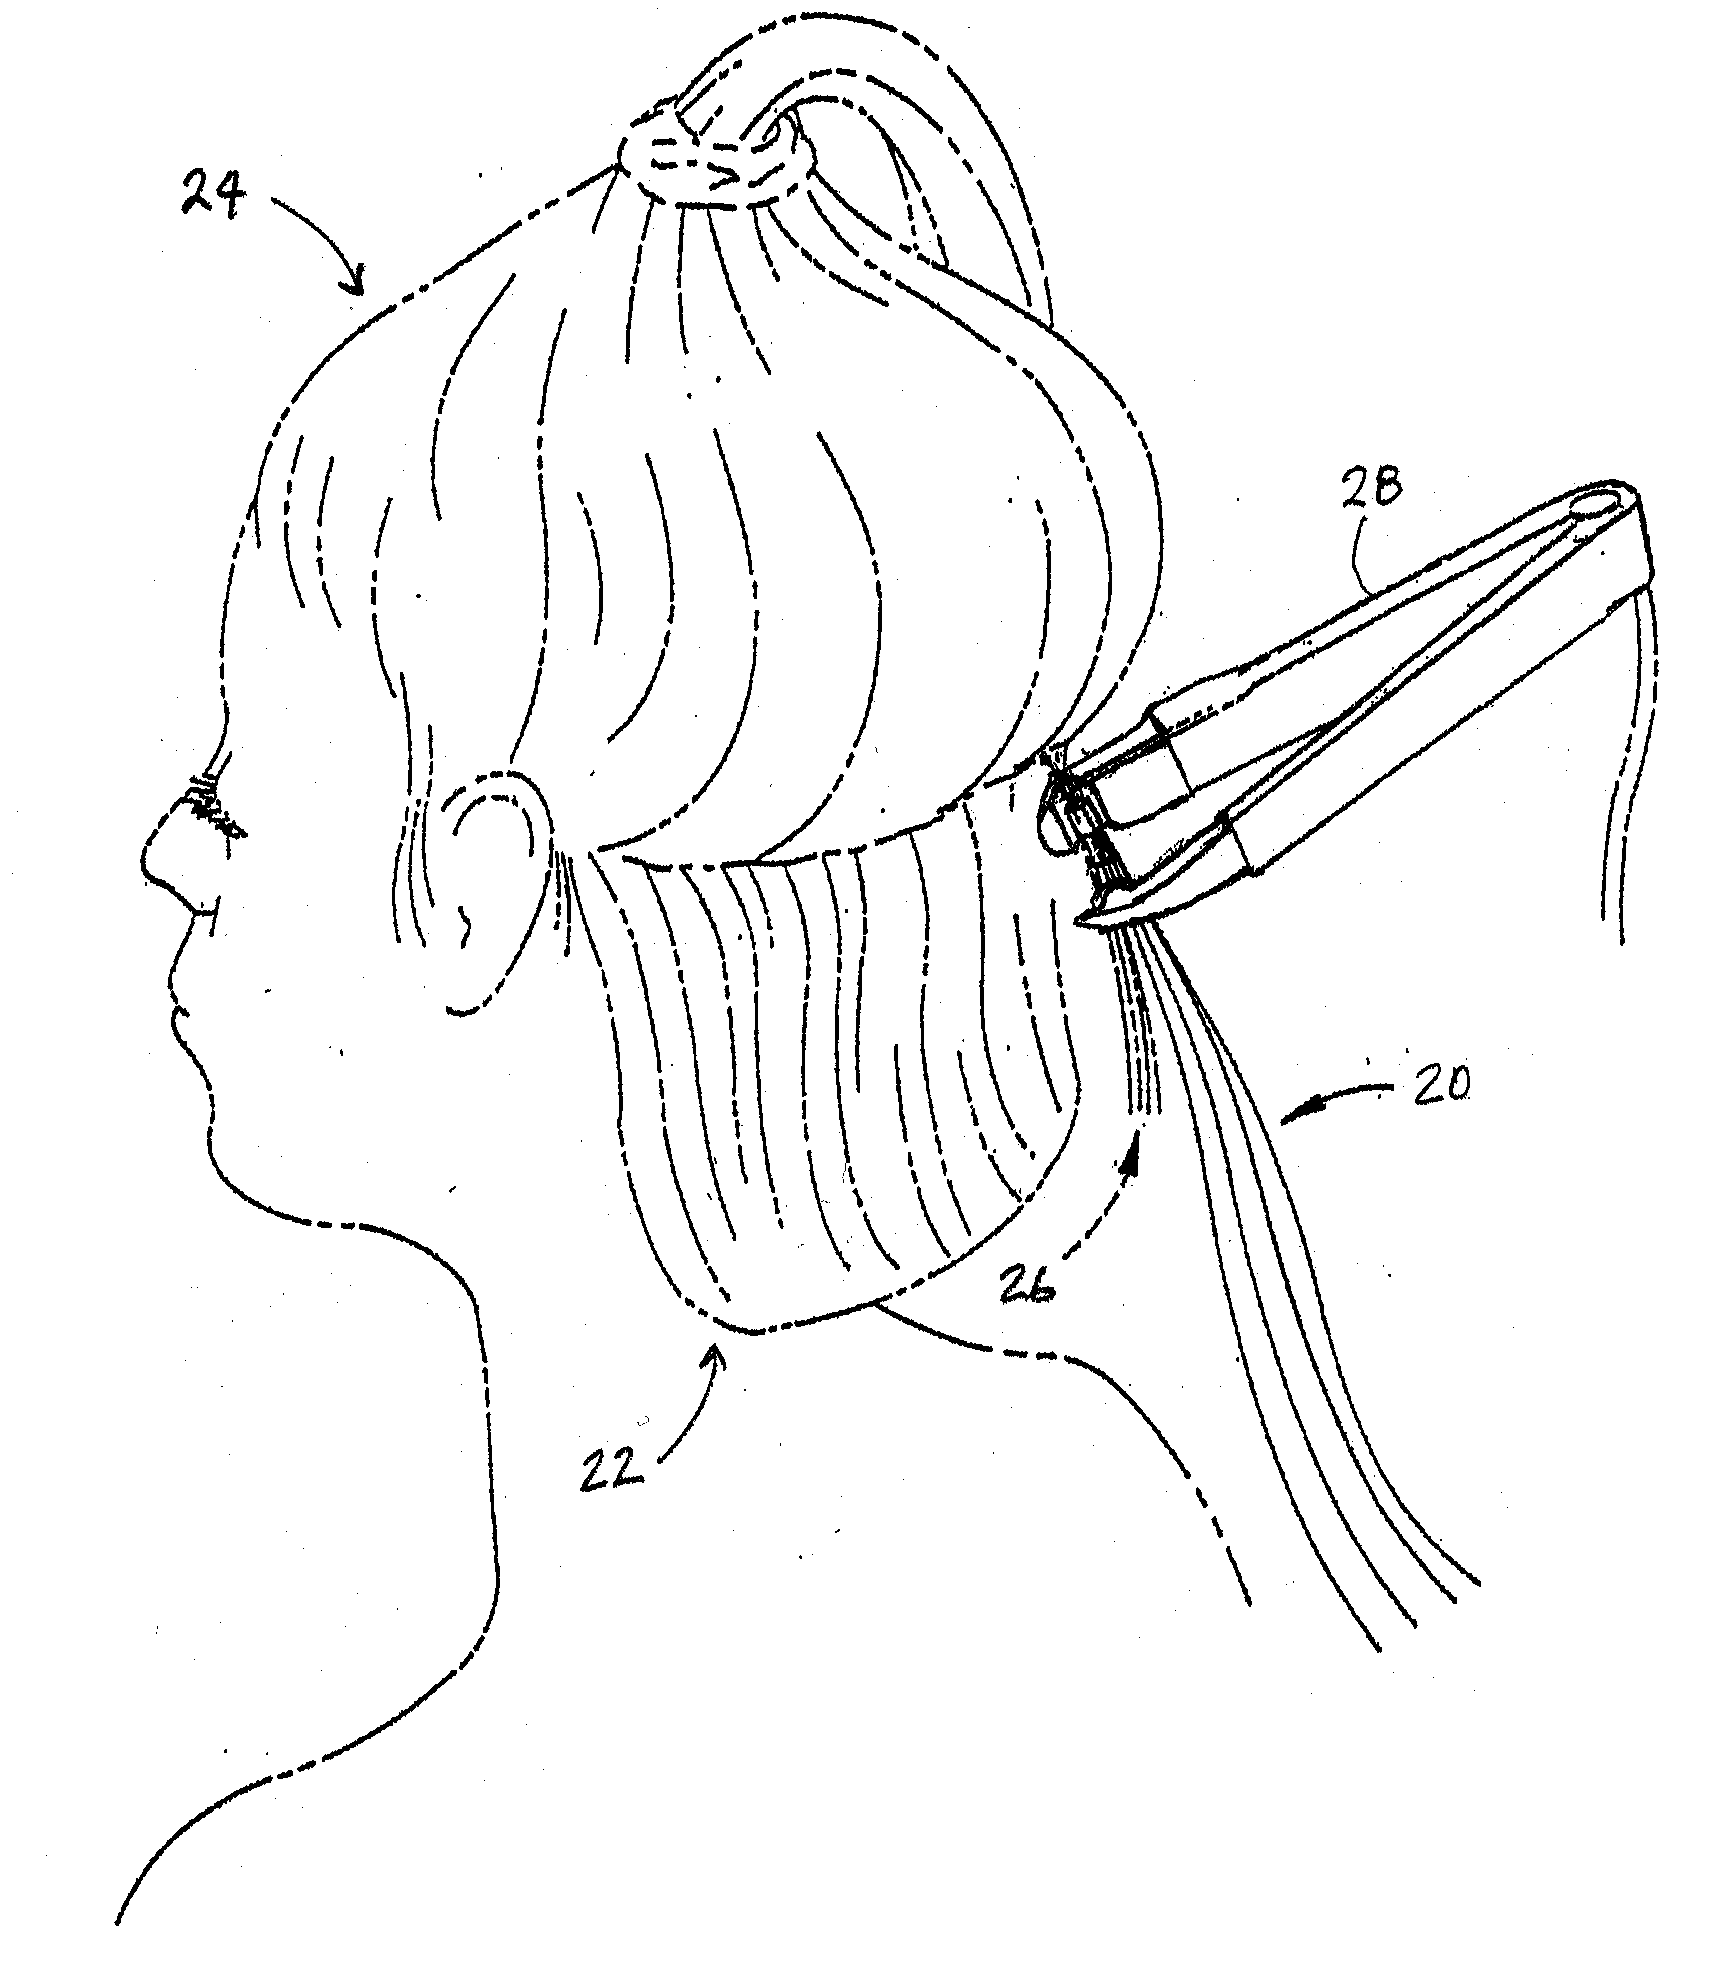 Method and apparatus for attaching supplemental hair to human hair